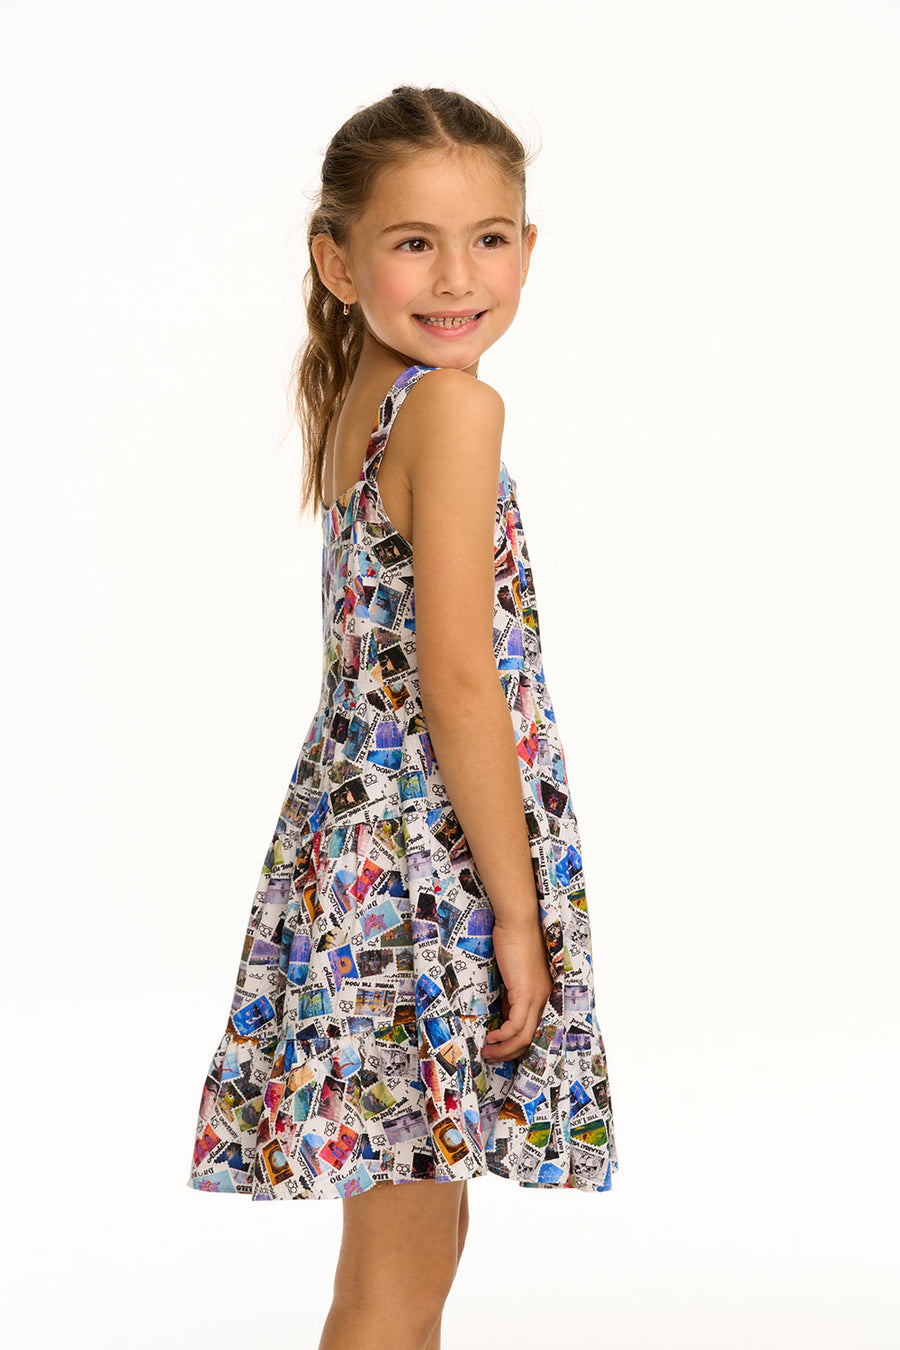 Disney 100 - Classic Stamps Tank Dress GIRLS chaserbrand